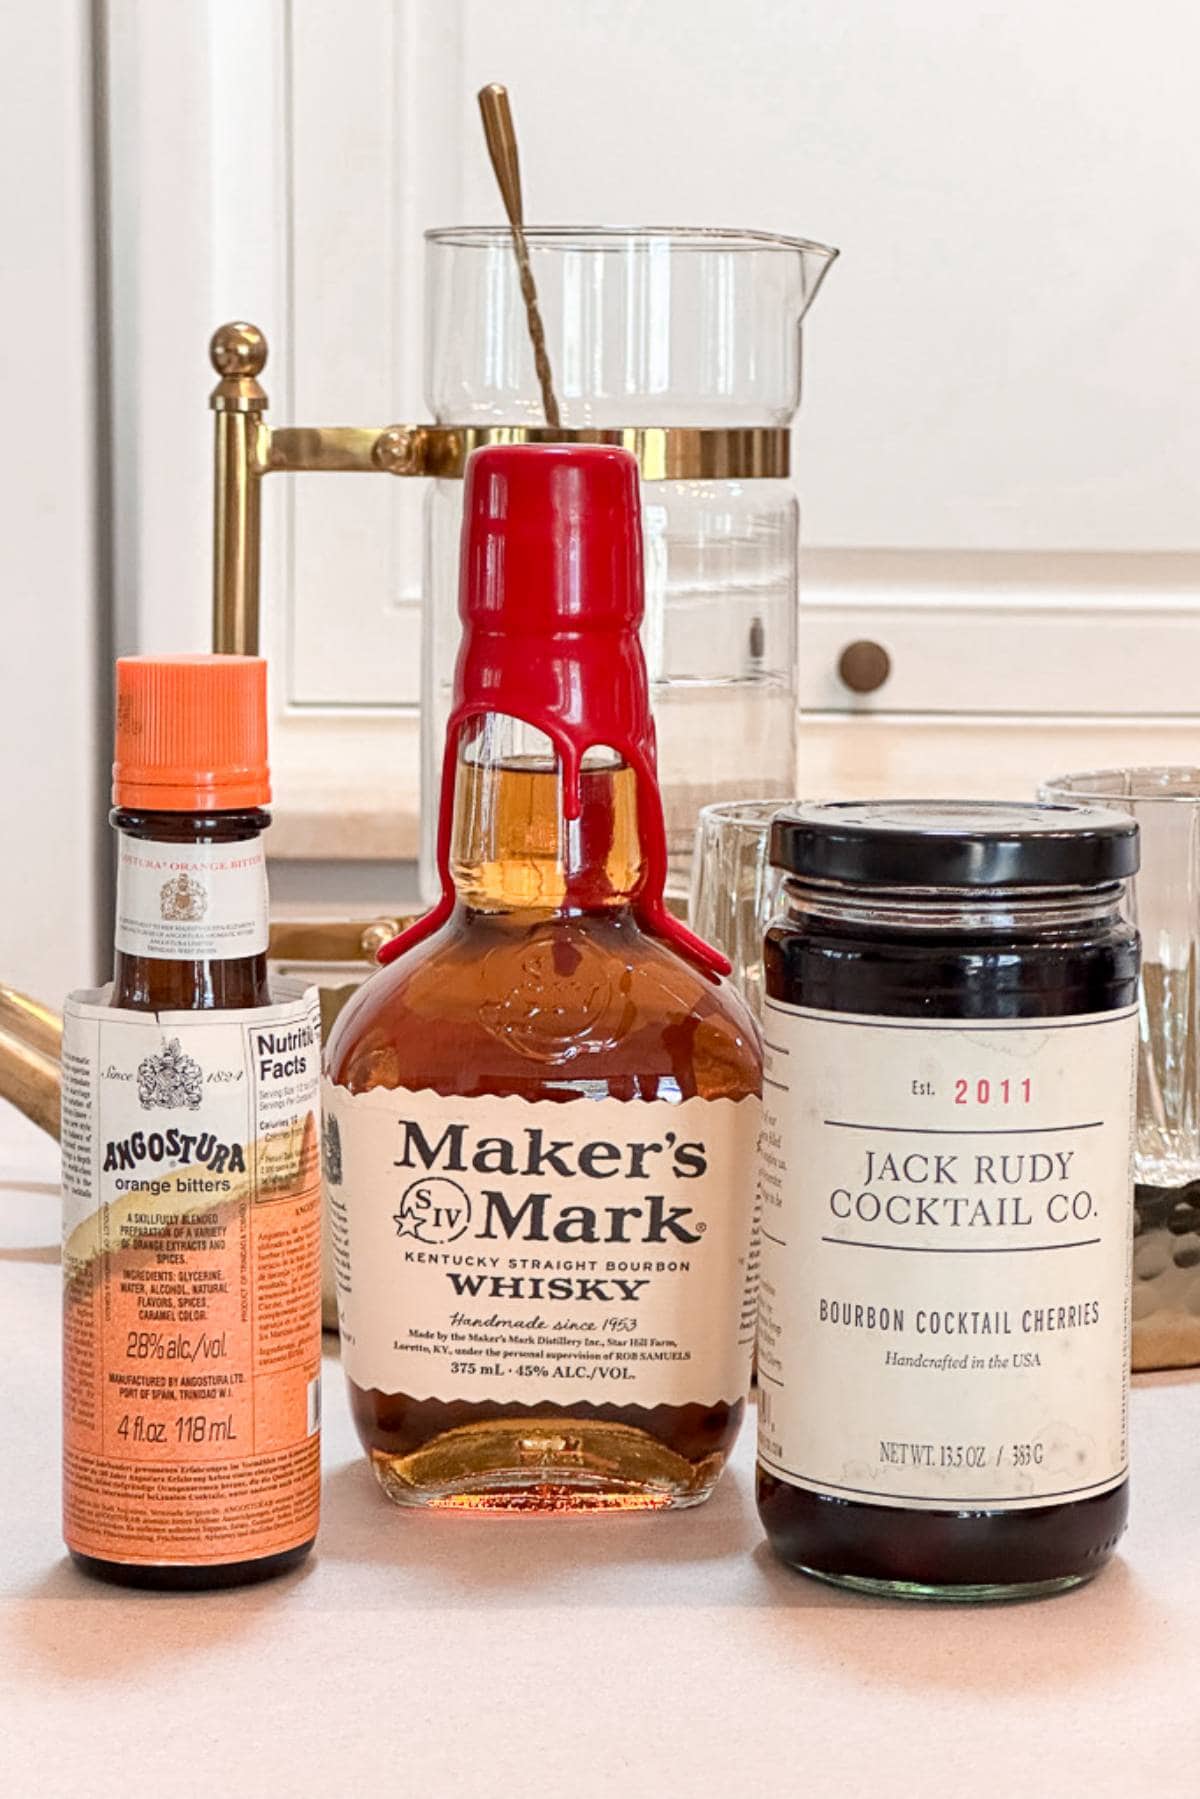 Three of the important ingredients to make an old fashioned.